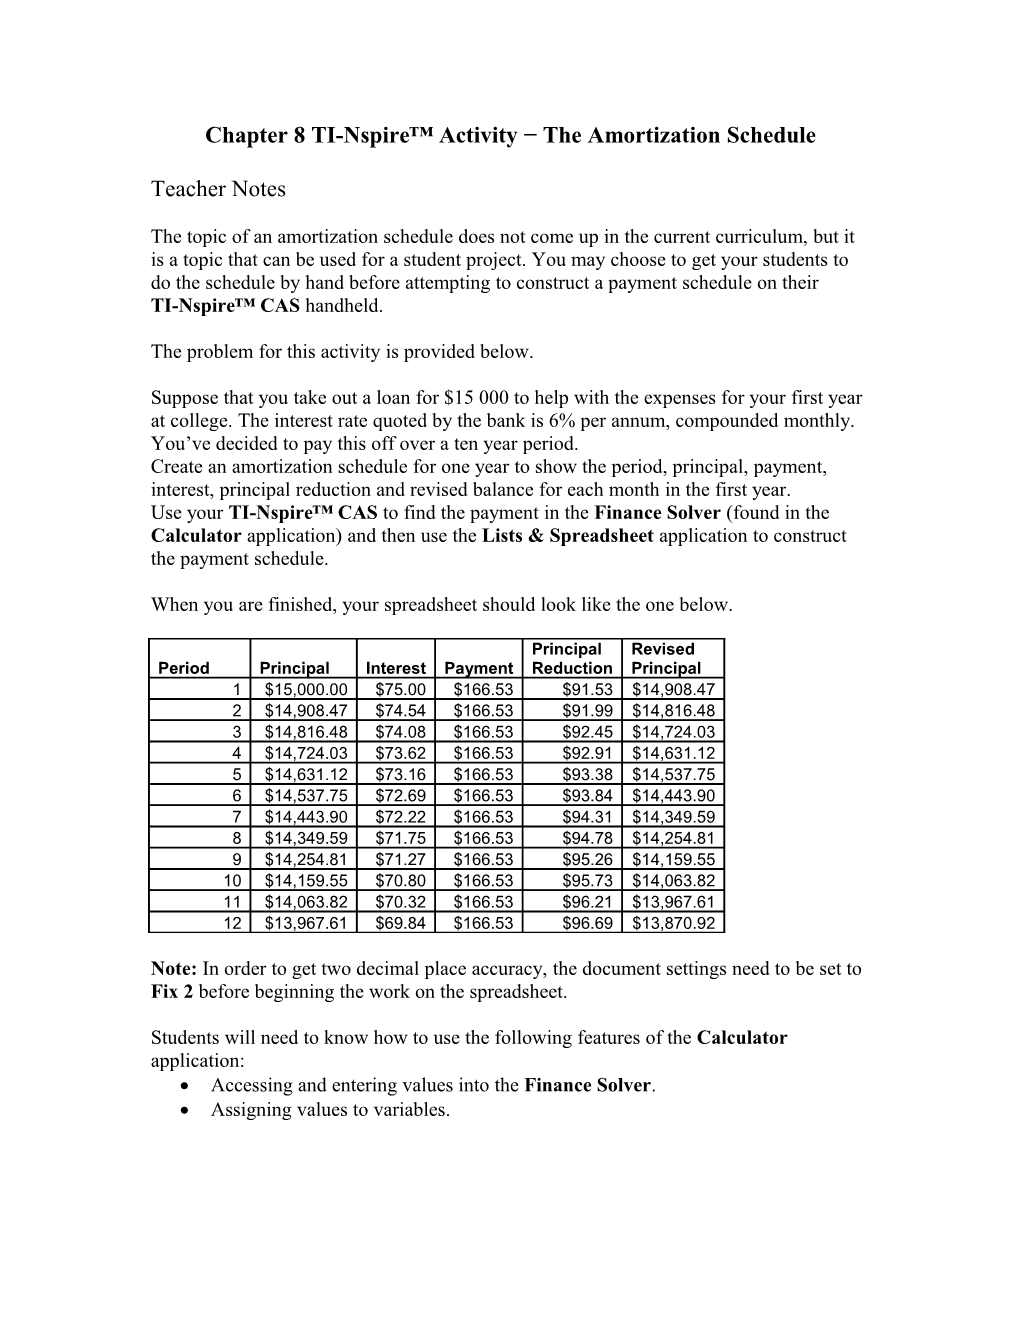 Teacher Notes for Amortization Schedule